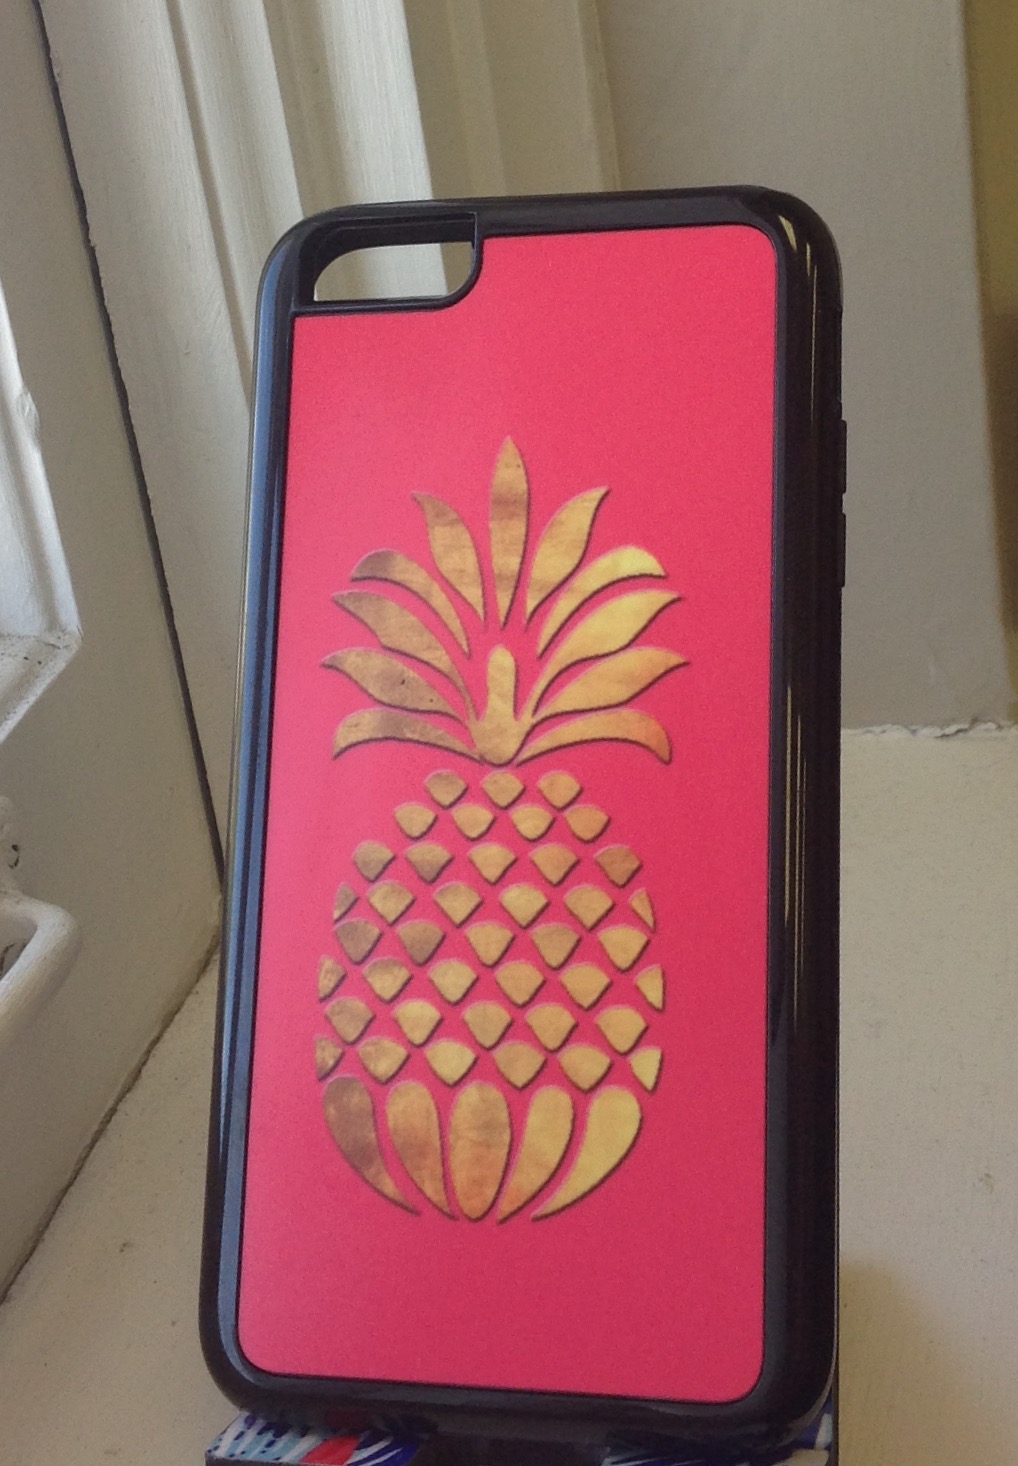 The Pineapple of my Eye! made with sublimation printing